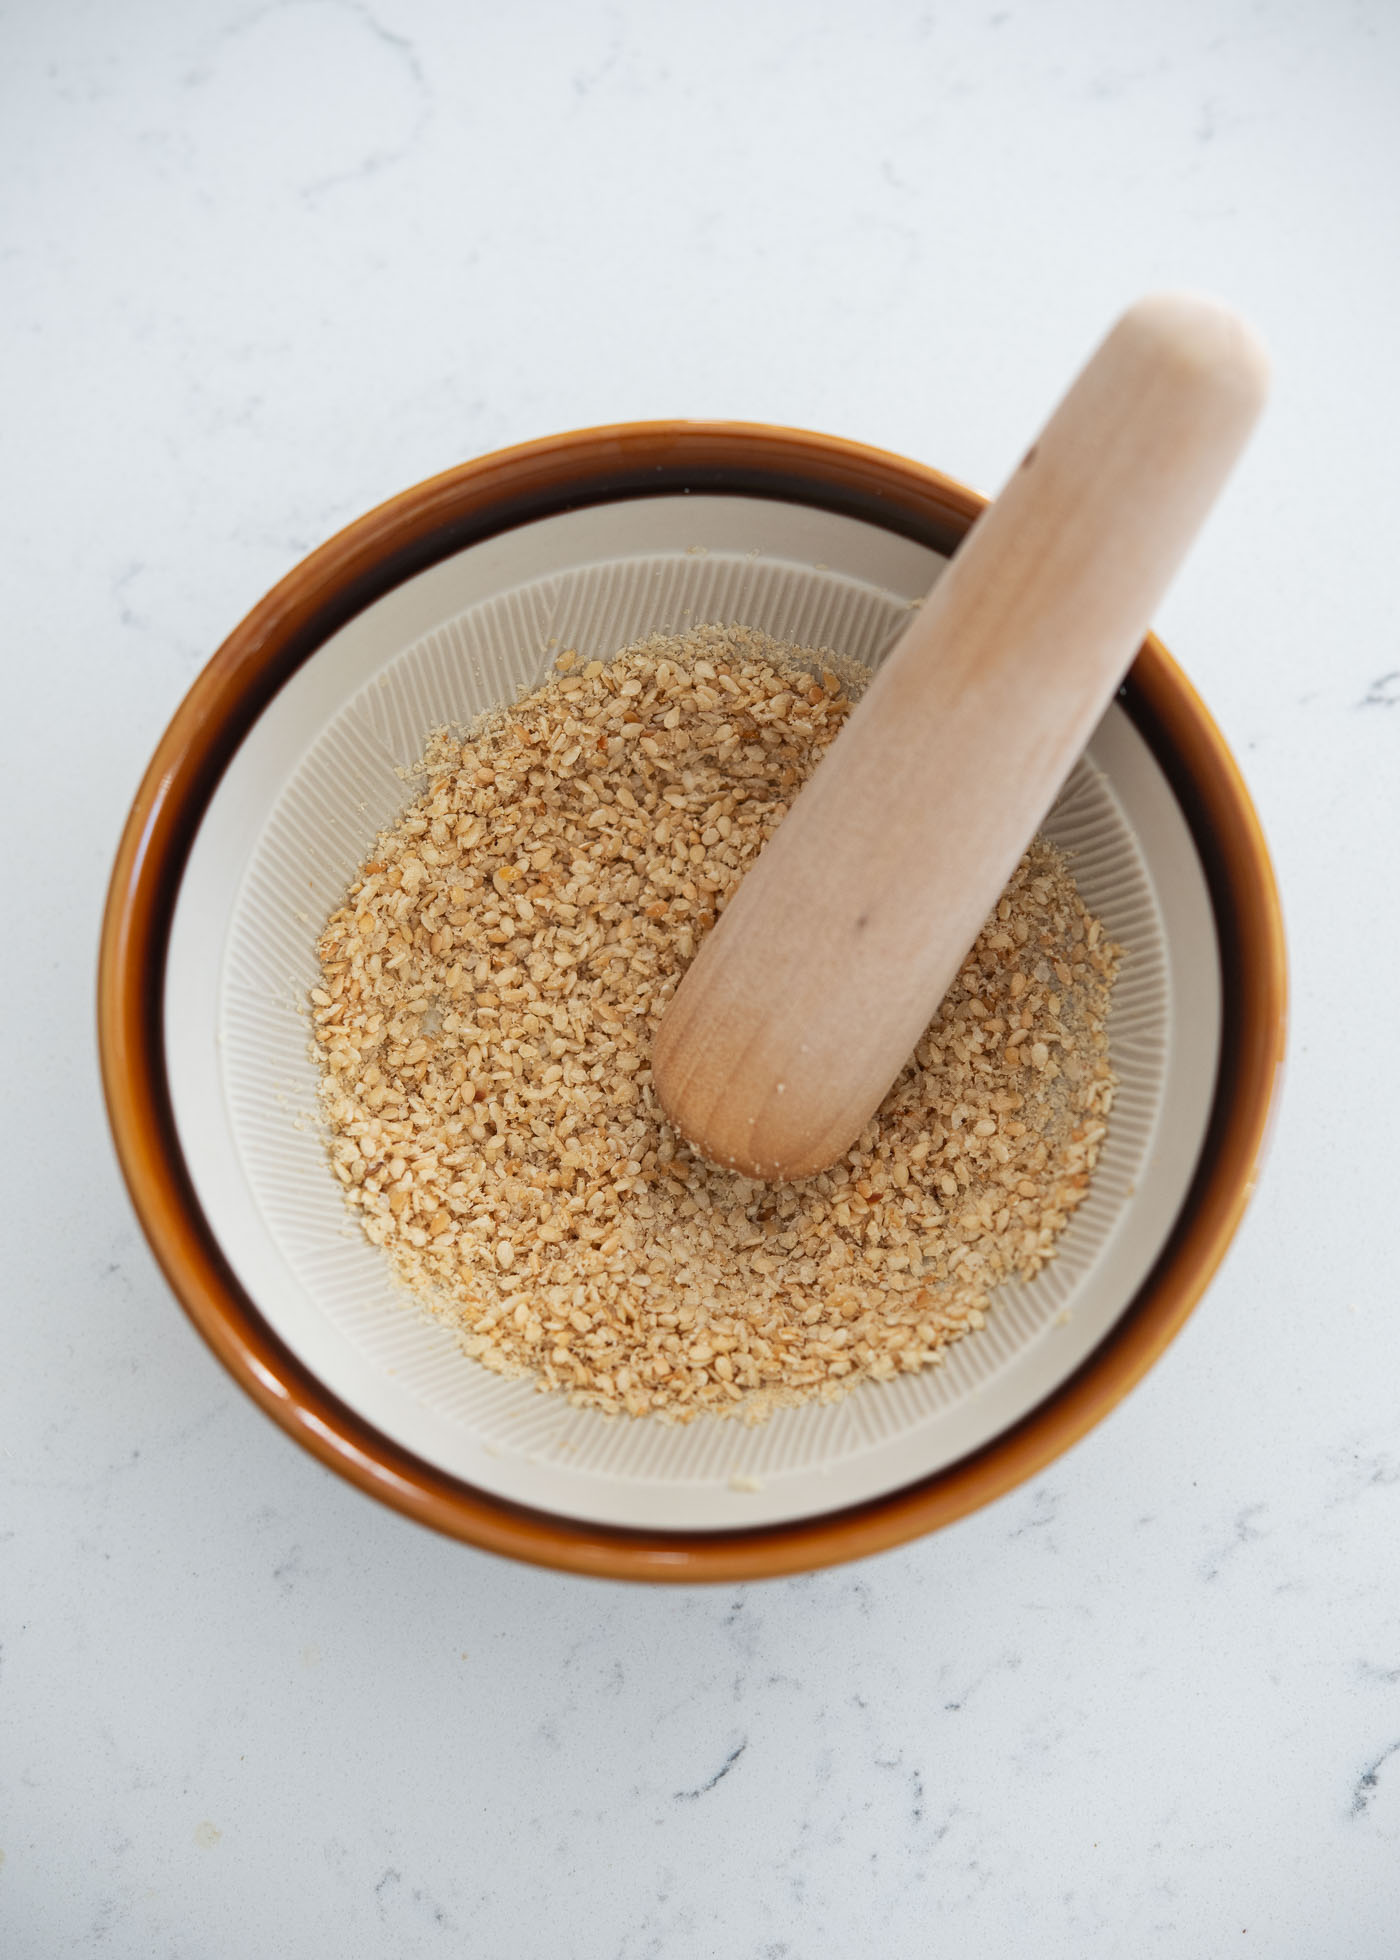 Toasted sesame seeds are being coarsely ground in a small mortar with a pestle.